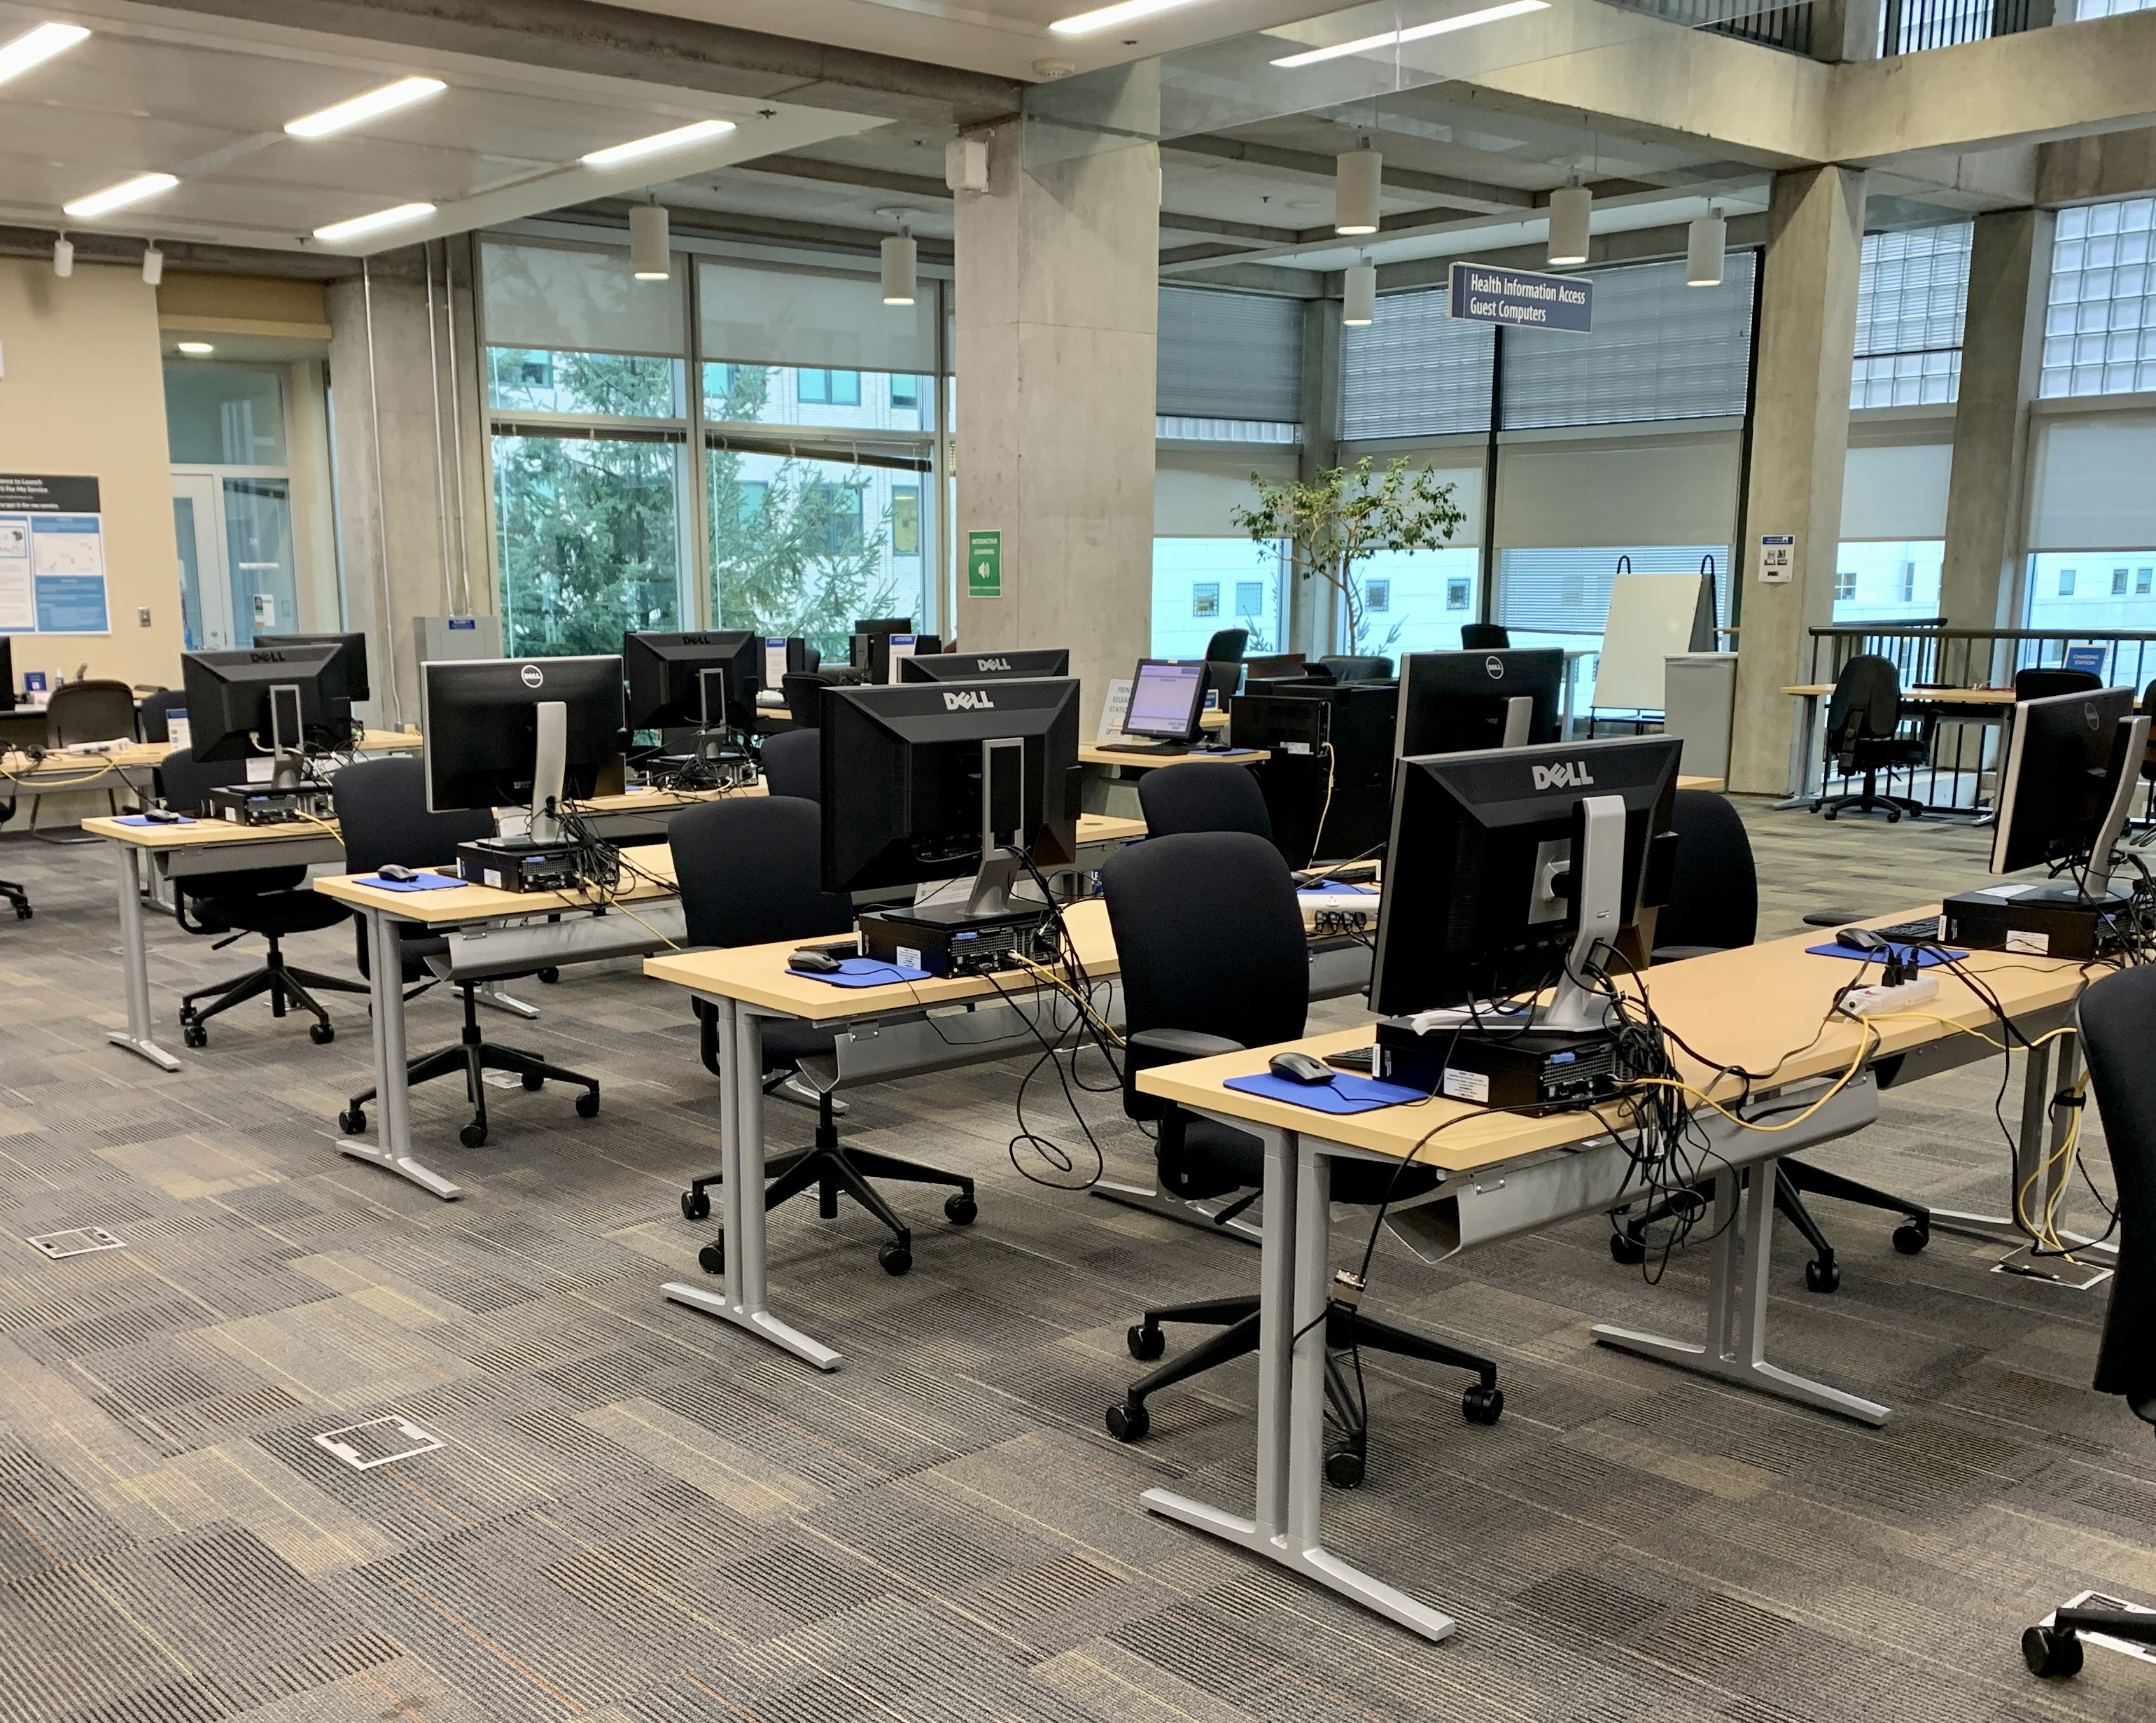 An open library space holds rows of computer stations with office chairs stationed at each. In the background, a wall of windows is visible.